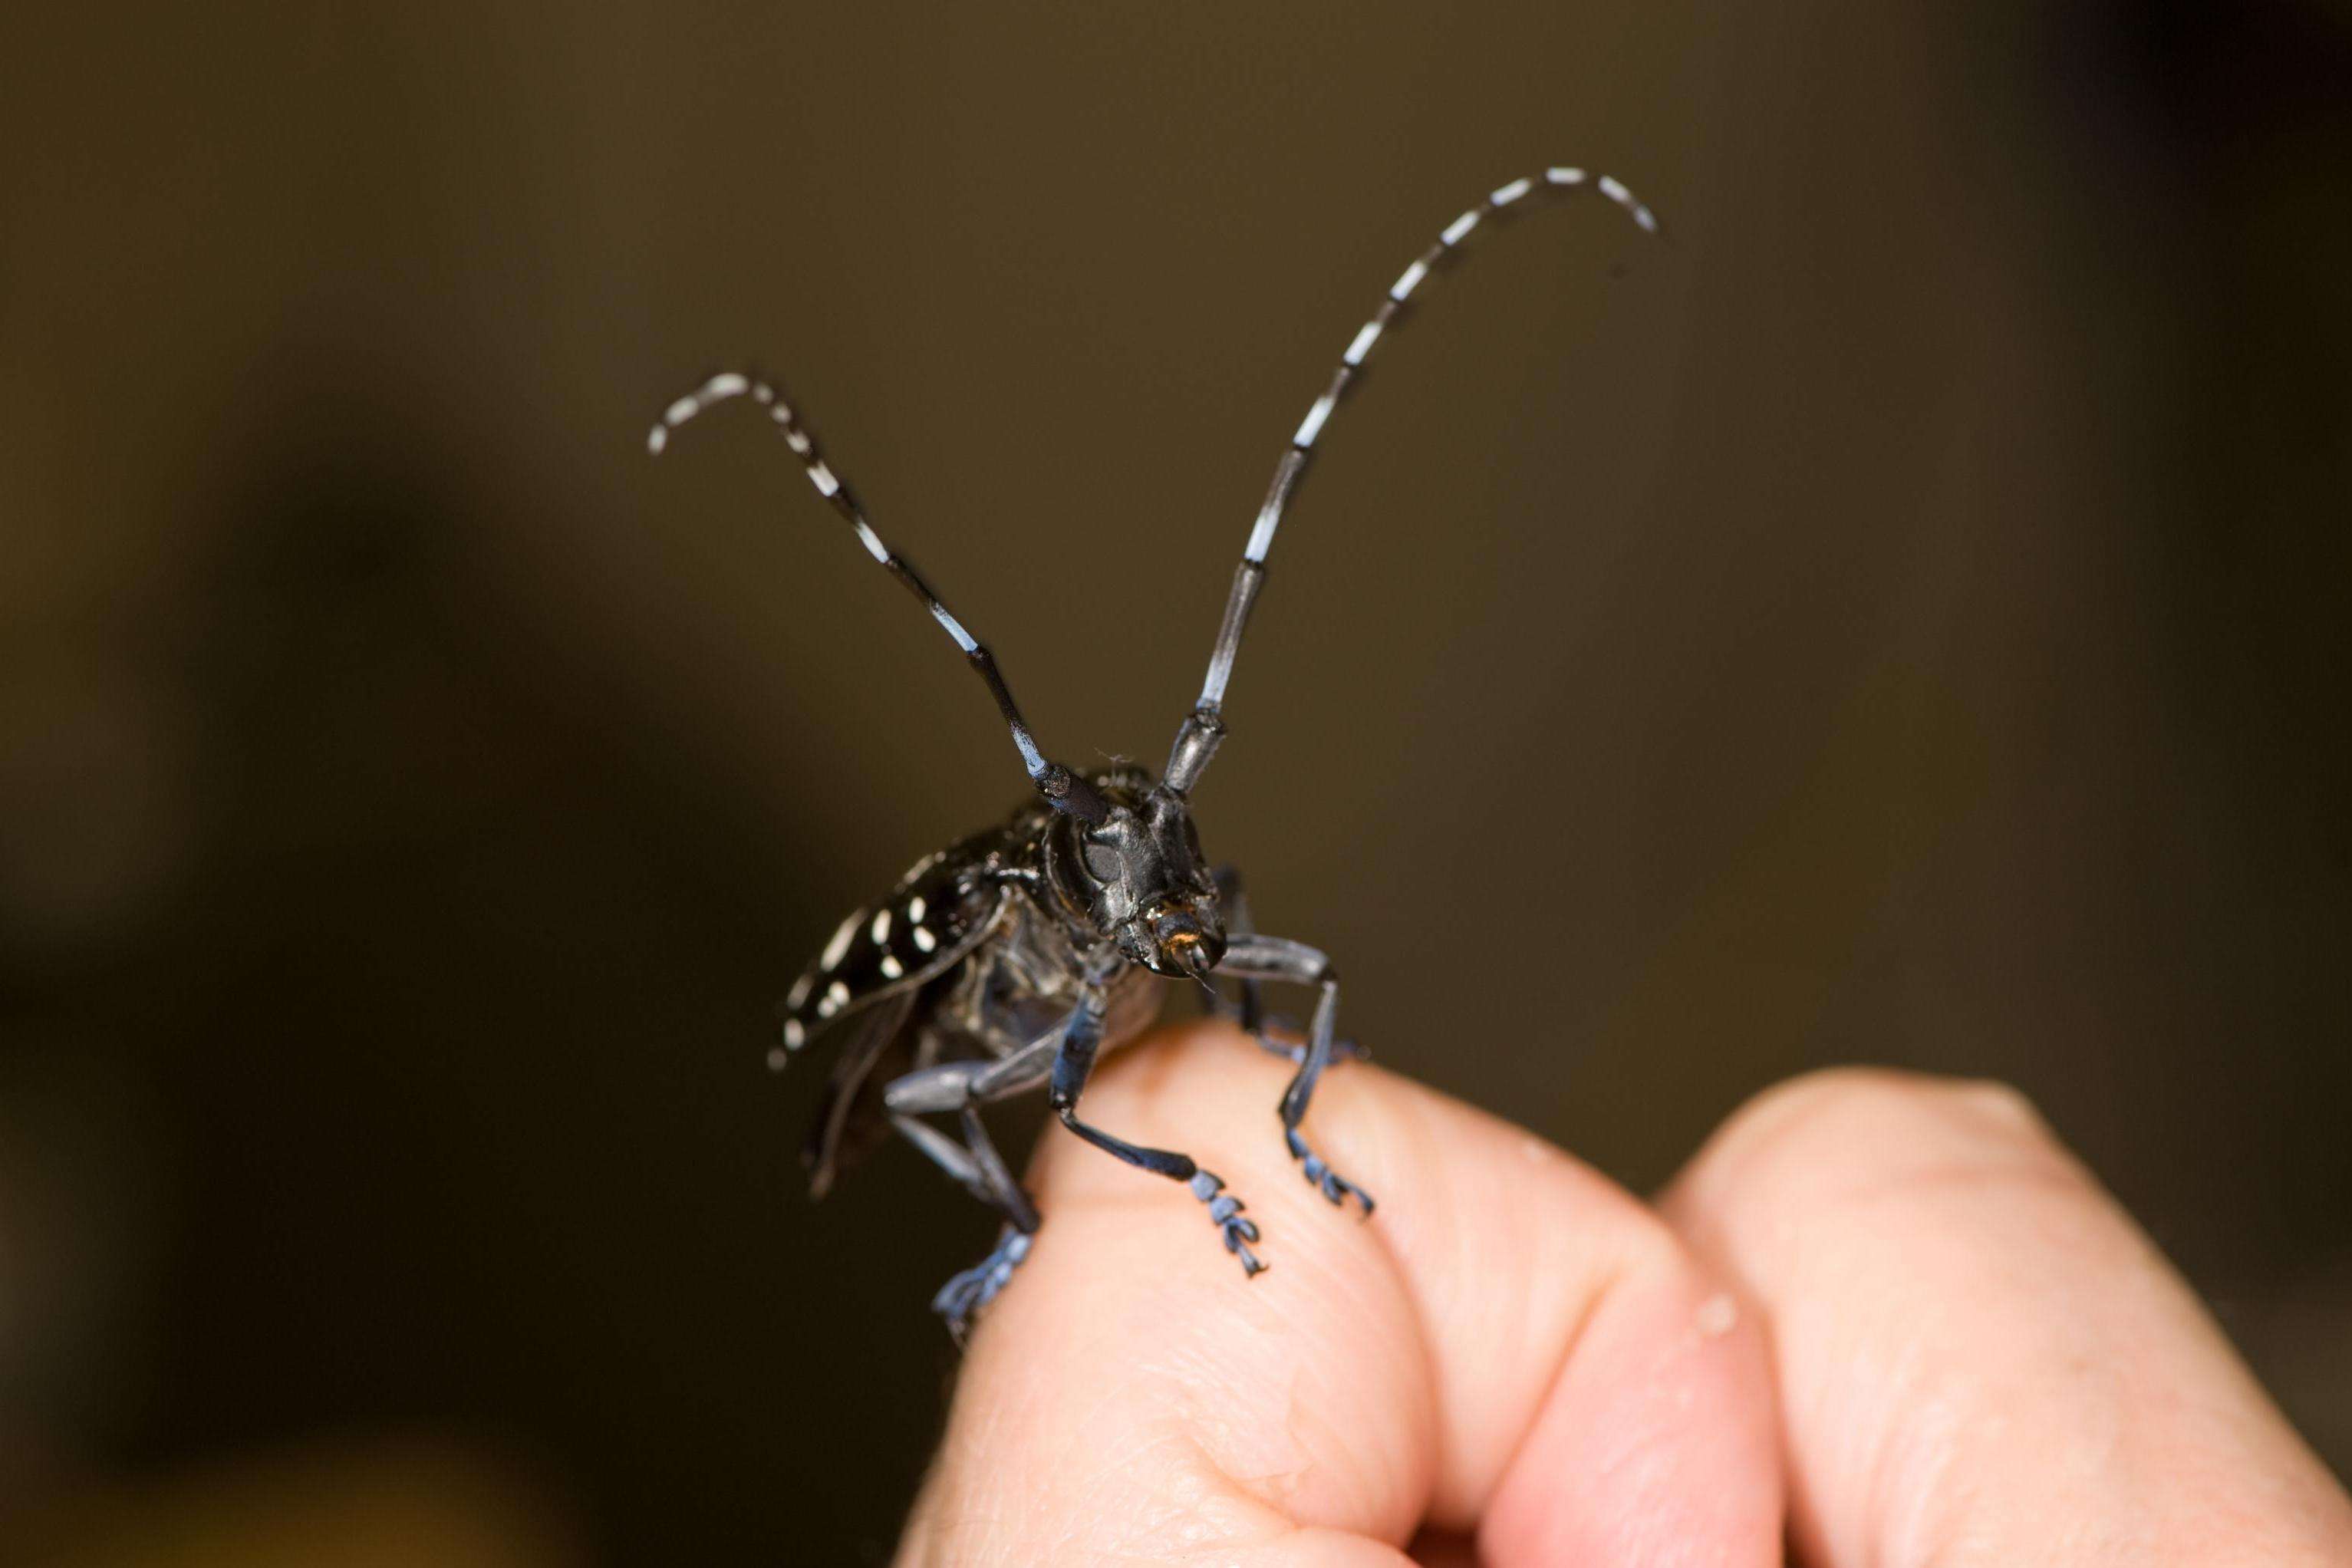 Balanced on an index finger the Asian longhorned beetle's face is dwarfed by its long black and white banded antenna.  The distinct bluish color on the ALB's legs and feet—a sign of a newly emerged adult.